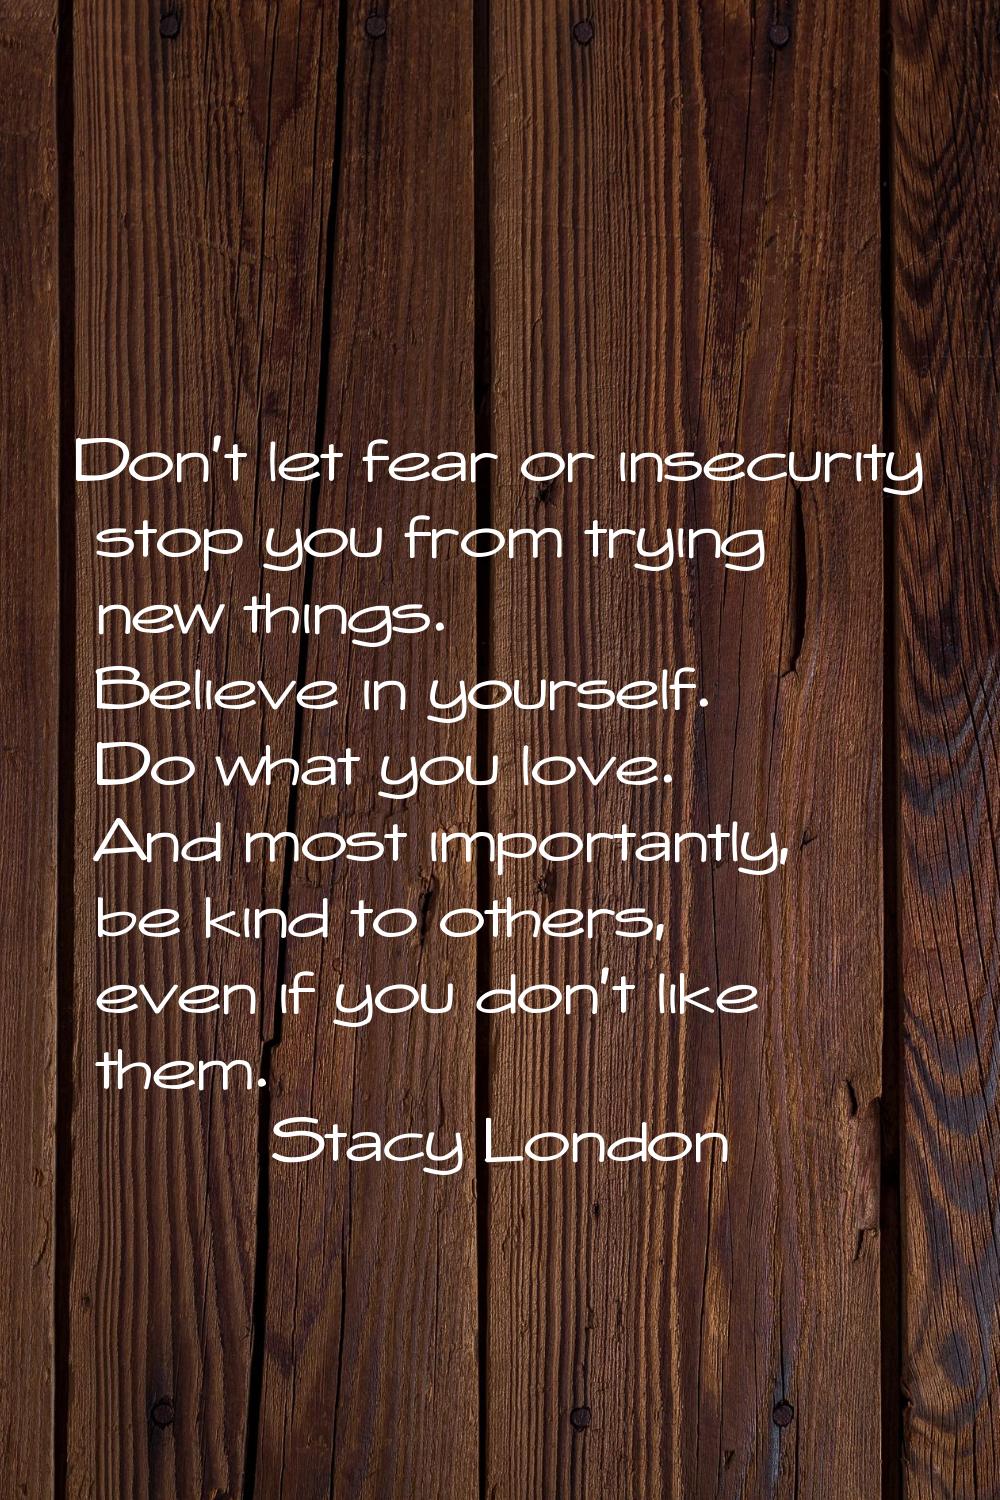 Don't let fear or insecurity stop you from trying new things. Believe in yourself. Do what you love